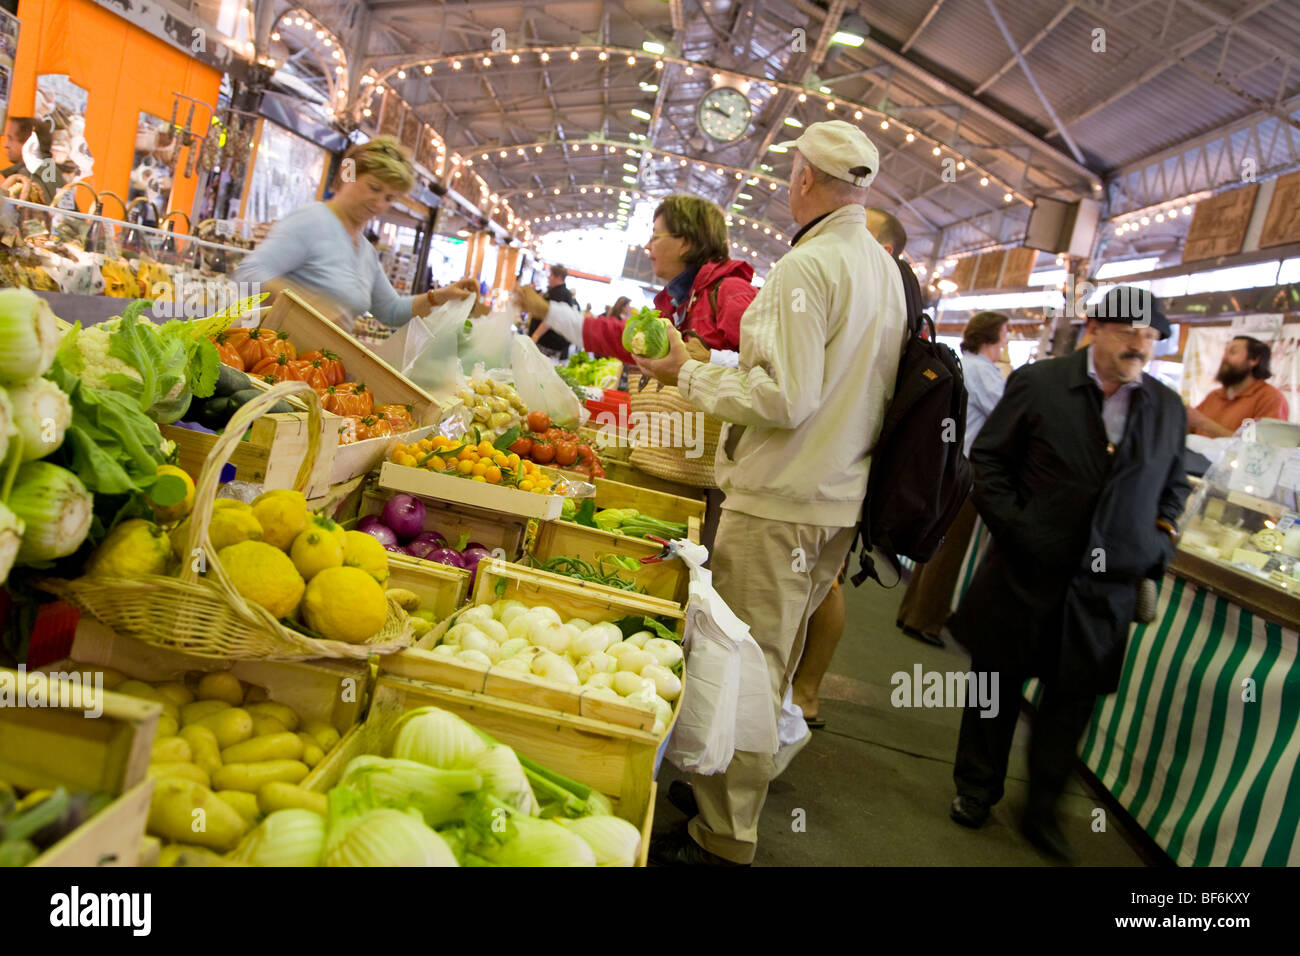 March Provencal, Market, Antibes, Cote D Azur, Provence, France Stock Photo